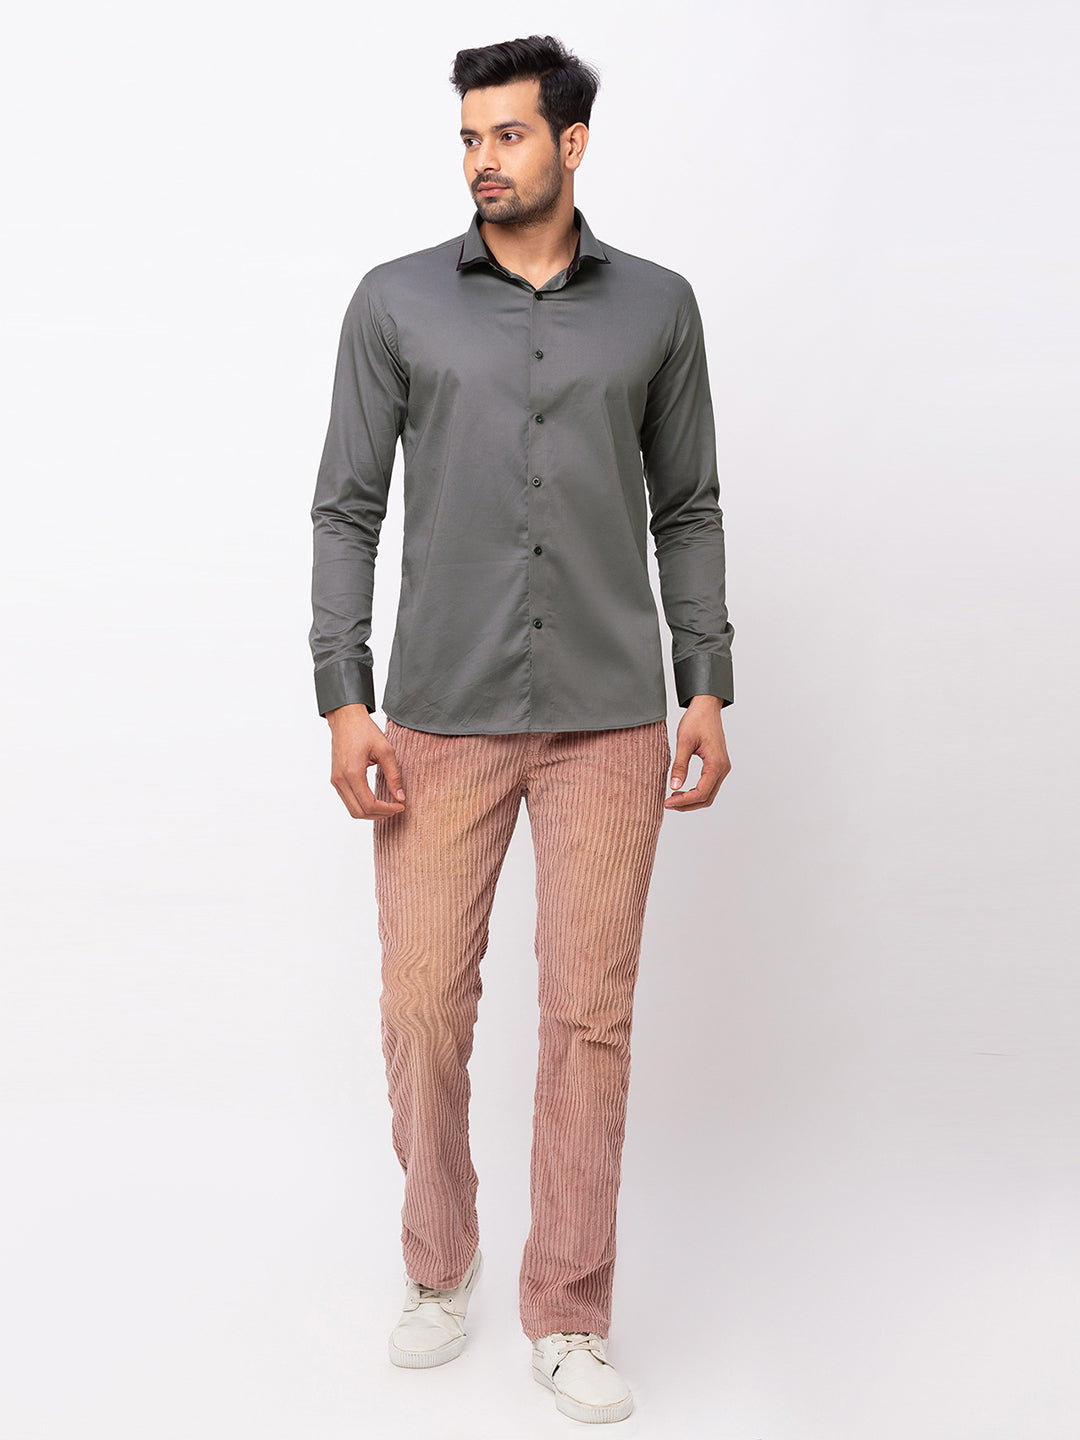 Grey Double Collared Casual Shirt